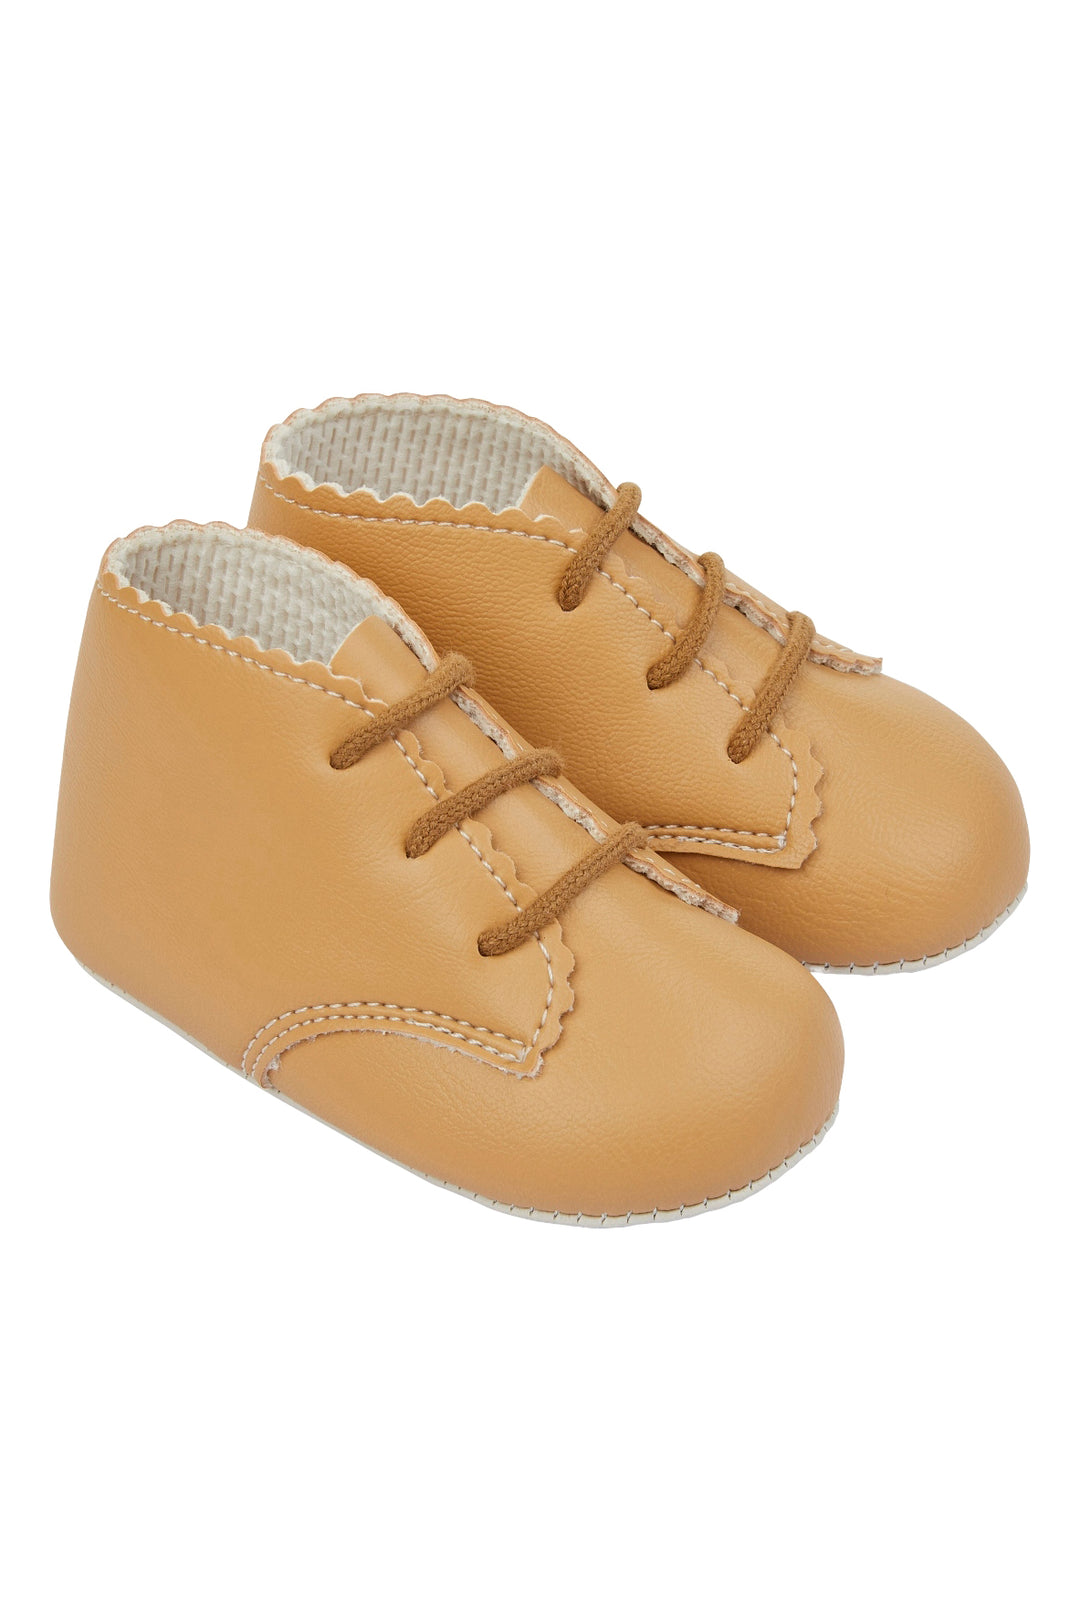 Baypods Camel Soft Sole Booties | iphoneandroidapplications